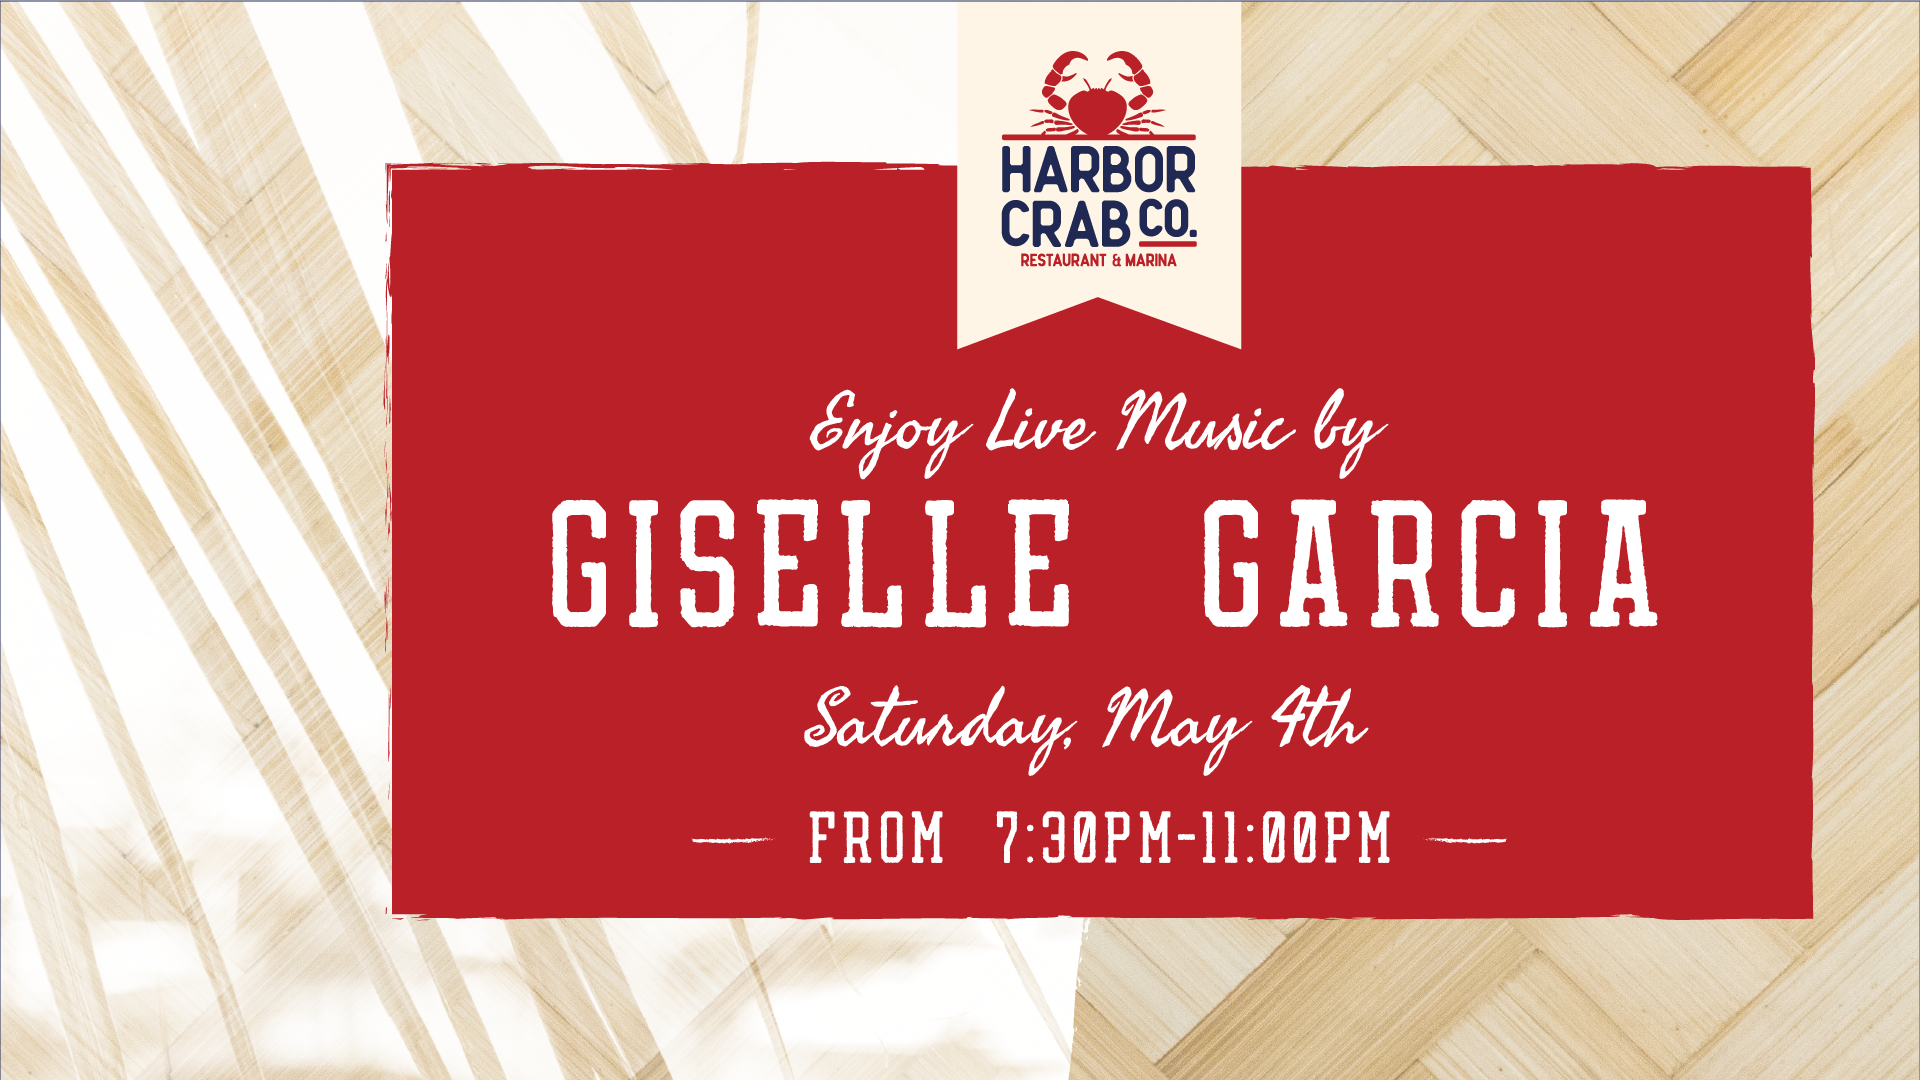 Live music by Giselle Garcia at Harbor Crab on May 4, from 7:30 pm to 11:00 pm.